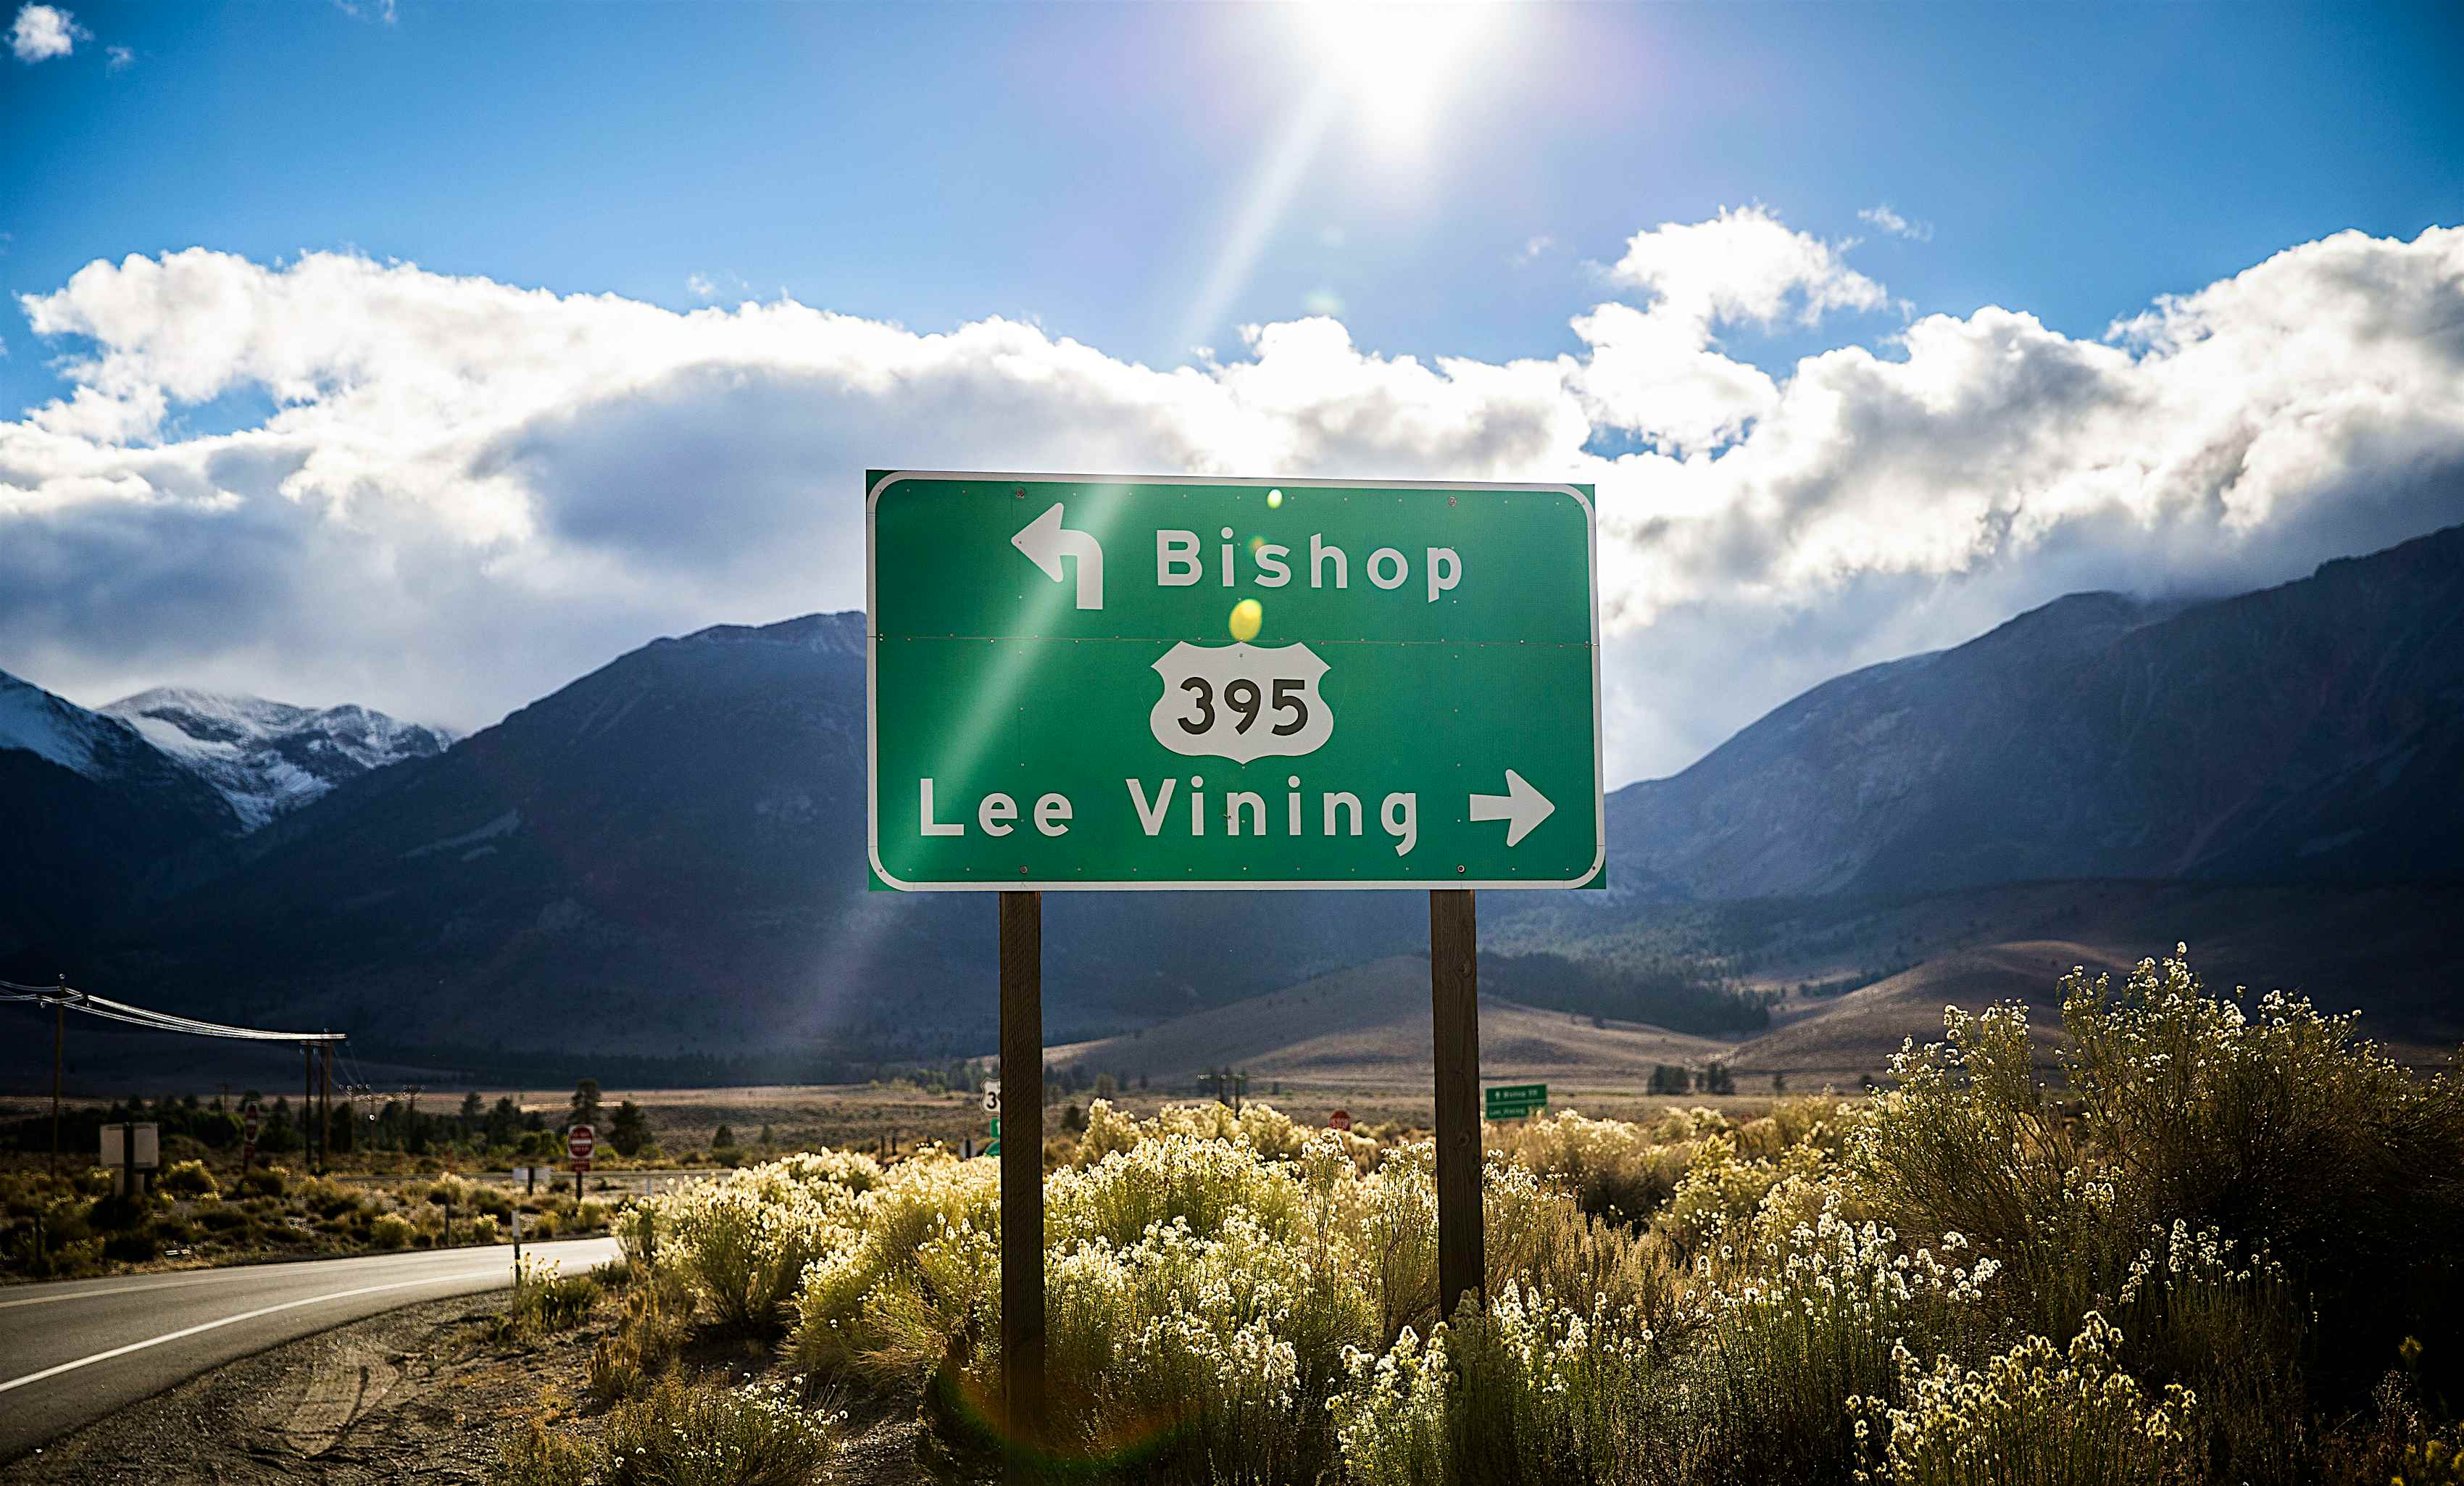 take-a-road-trip-on-california-s-highway-395-lonely-planet